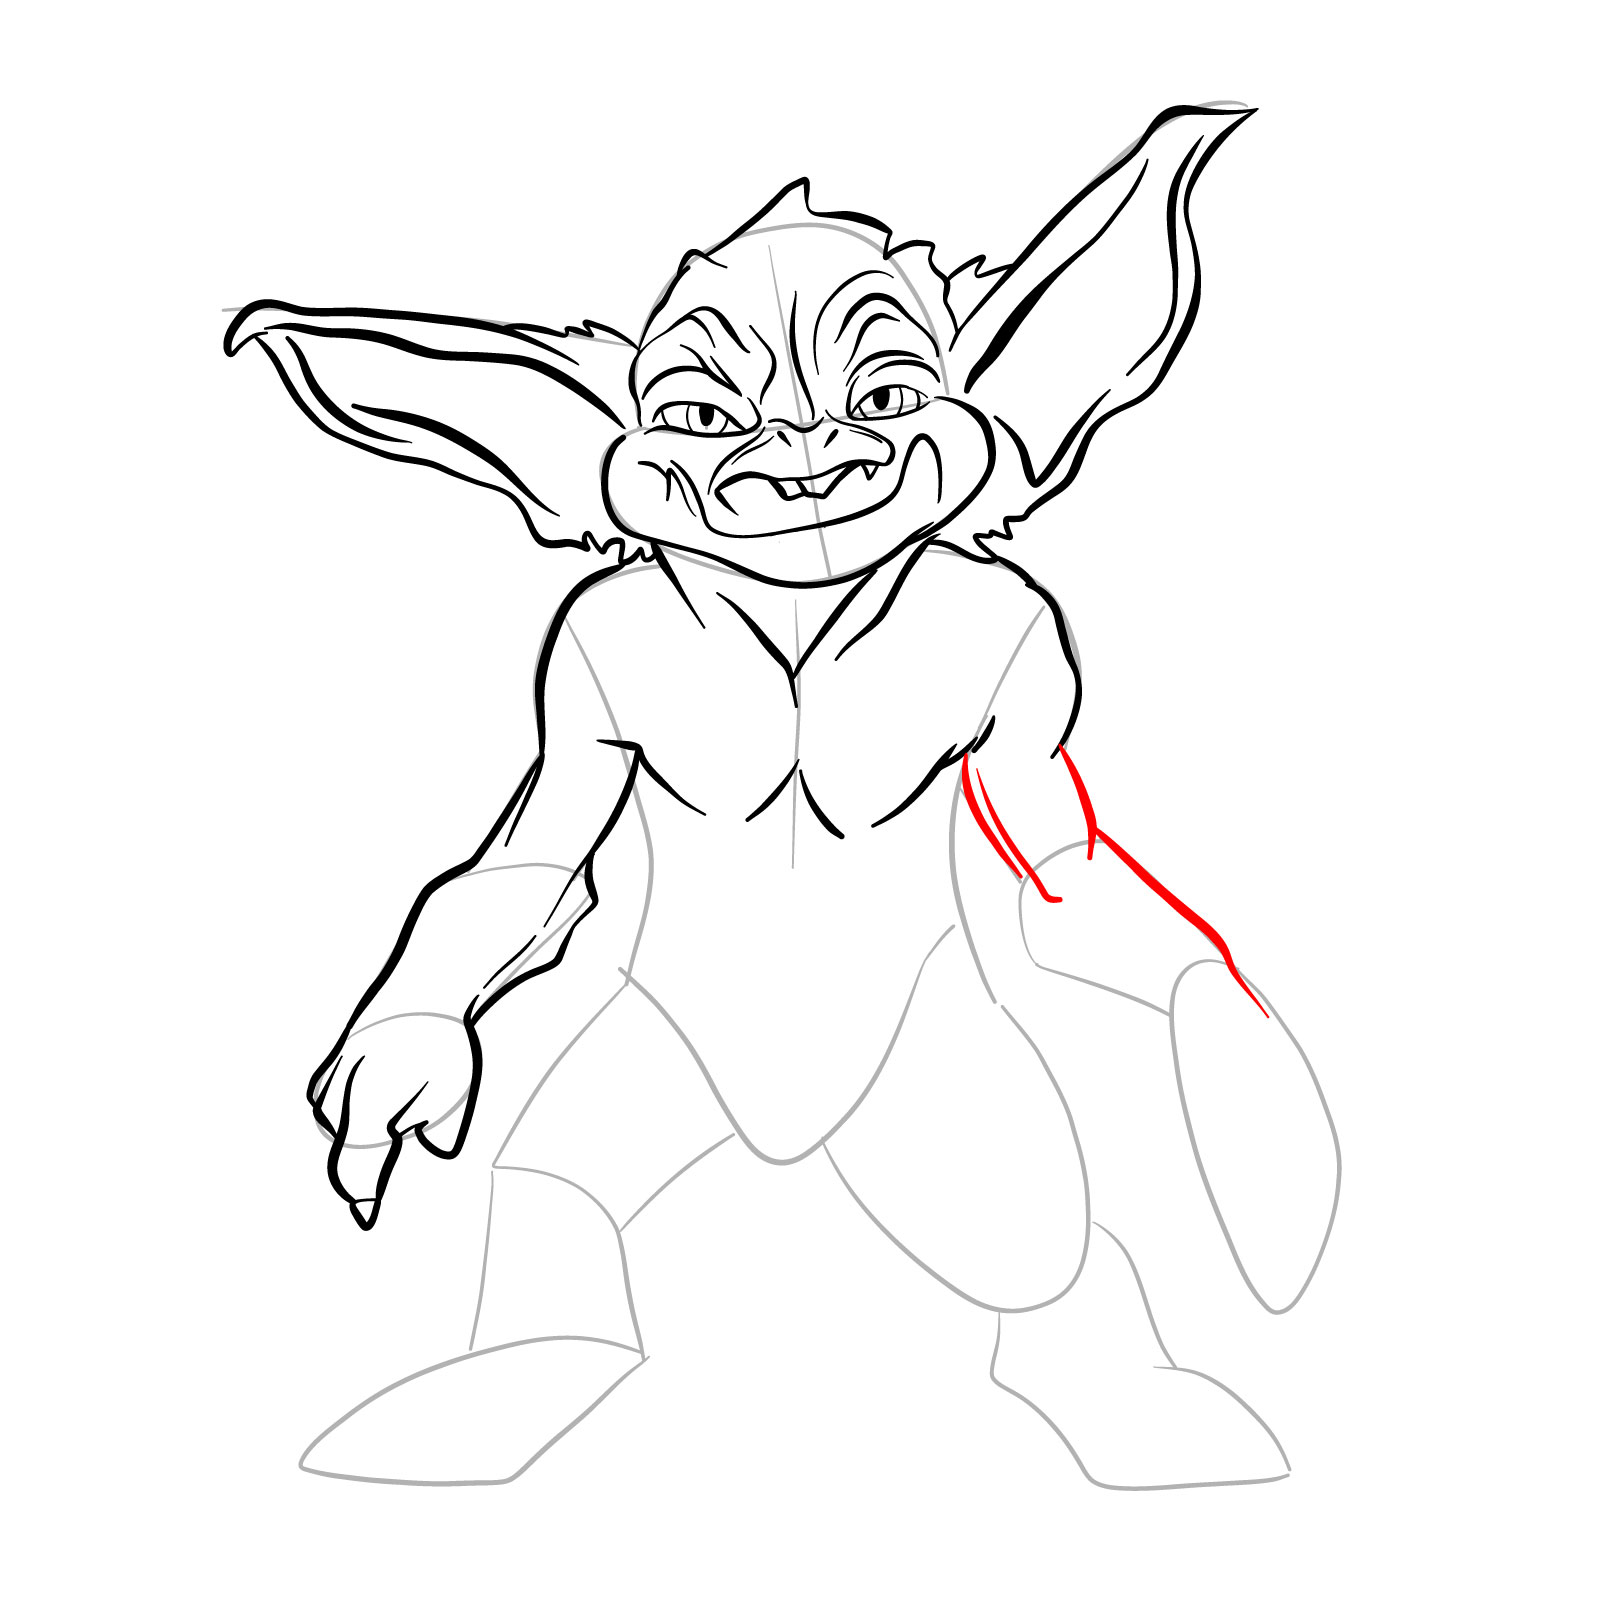 How to draw a Goblin - step 19